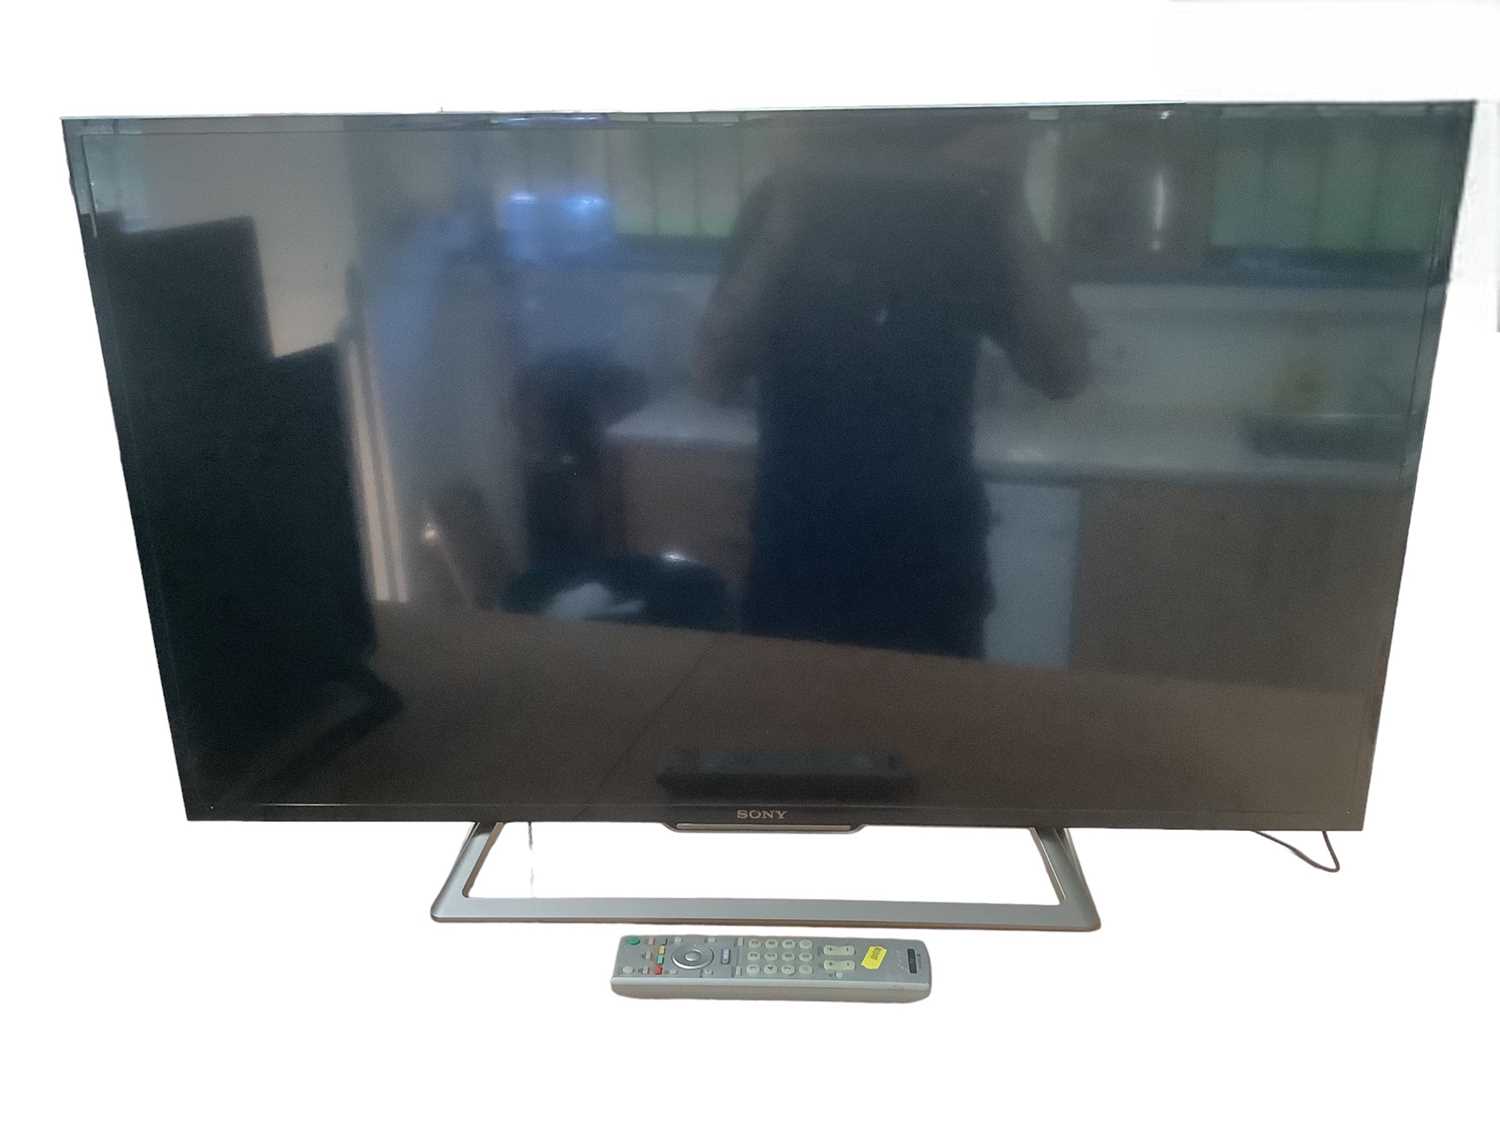 Lot 6 - 40" Sony Bravia TV with remote control together with a Sony DVD Recorder RDR-GX210